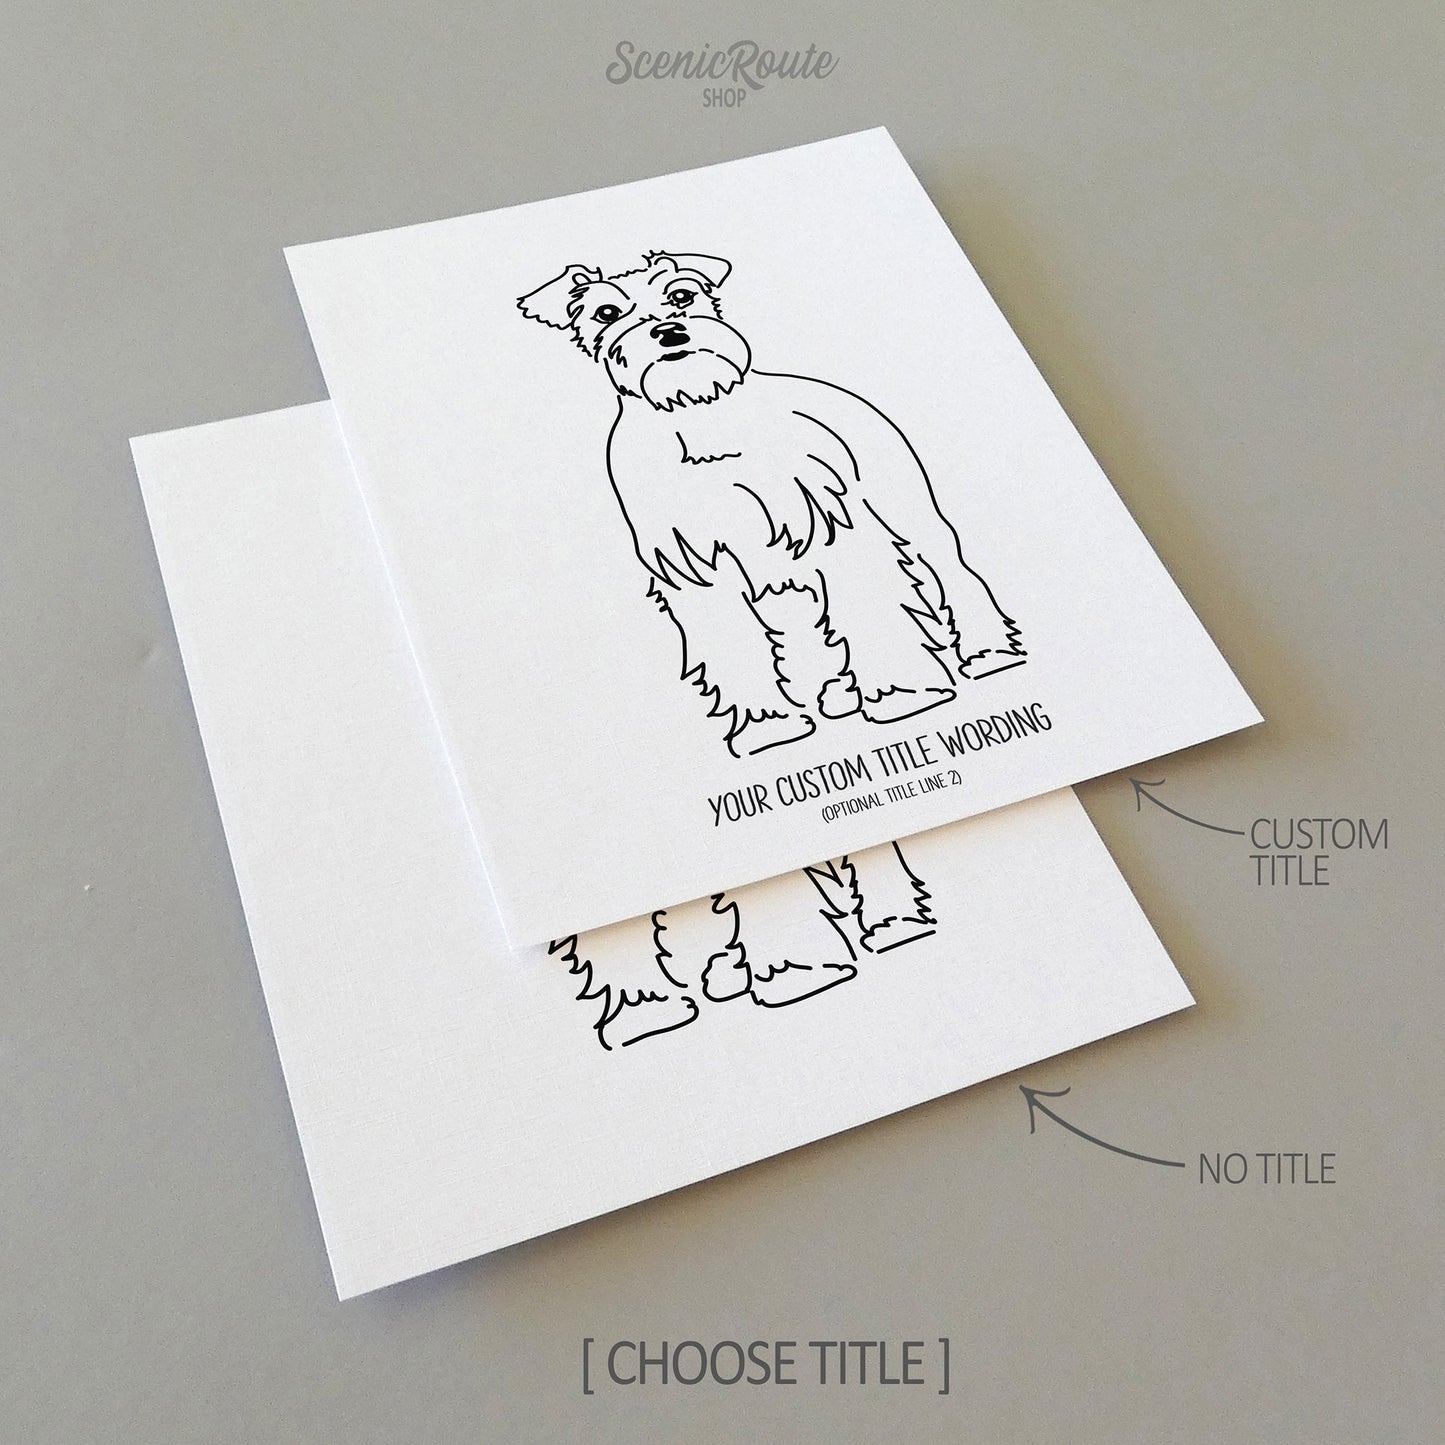 Two line art drawings of a Schnauzer dog on white linen paper with a gray background.  The pieces are shown with “No Title” and “Custom Title” options for the available art print options.